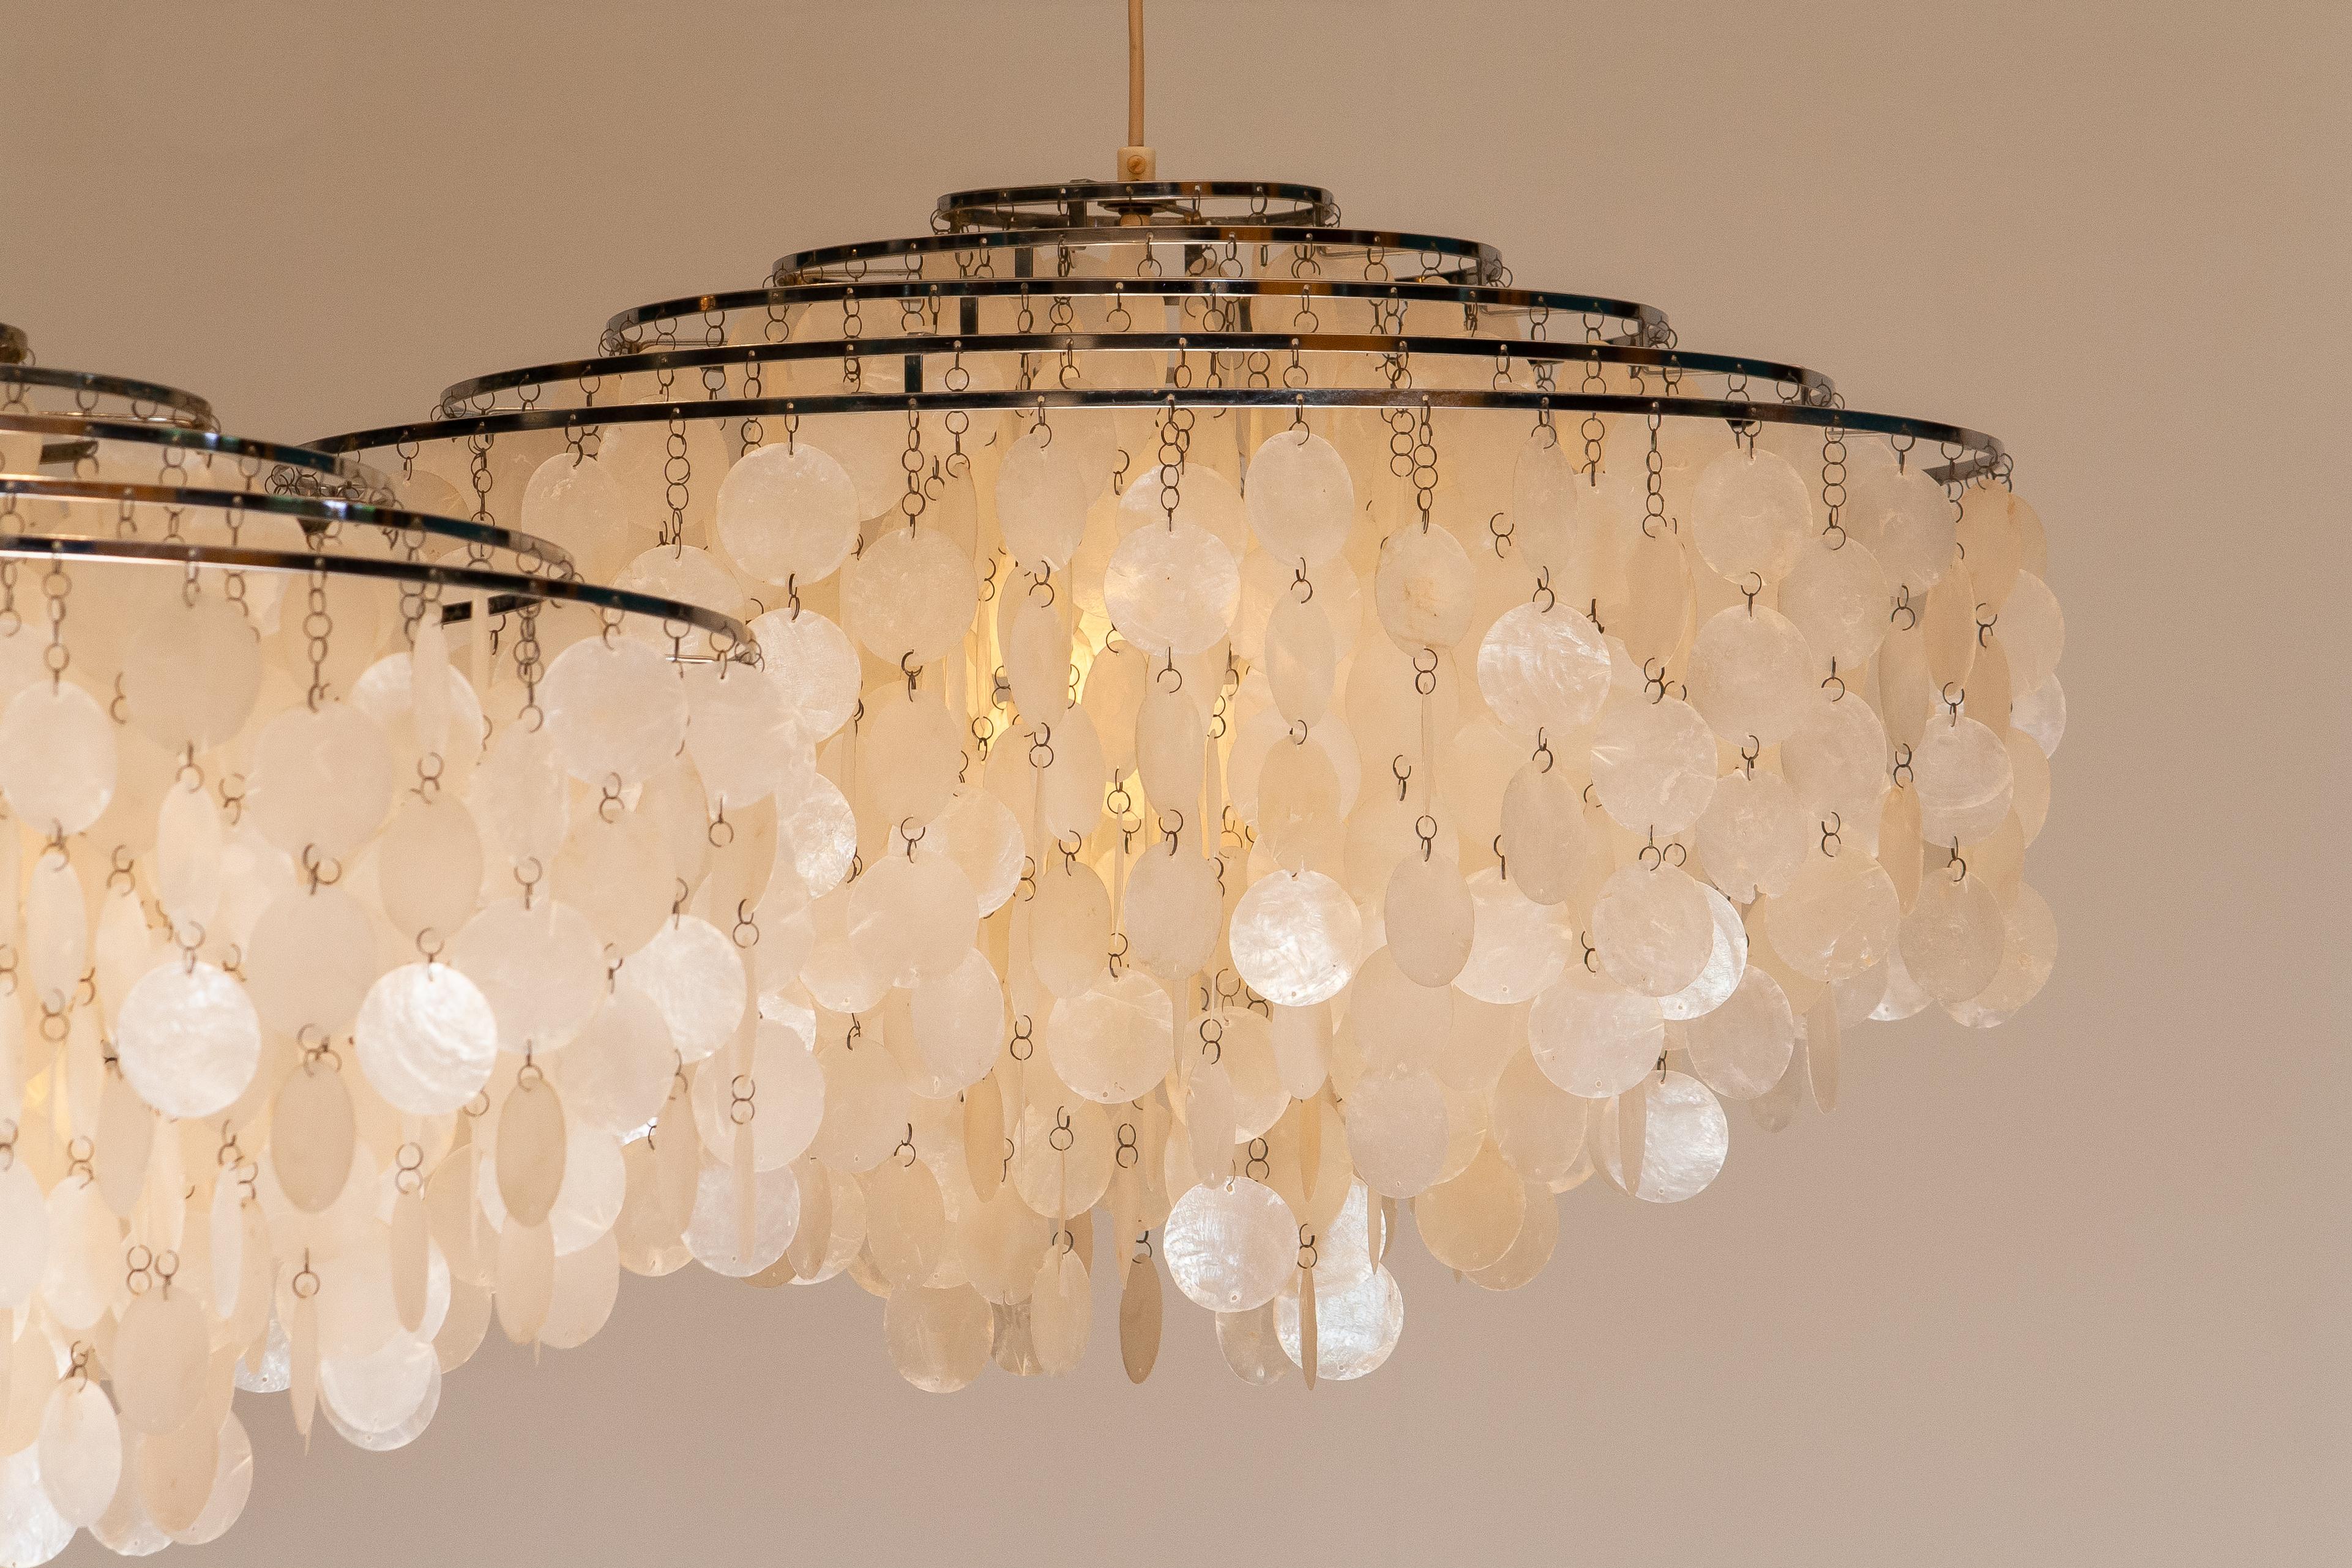 Pair of Extra Large Capiz Shell Chandeliers by Verner Panton for Luber AG. Swiss In Good Condition In Silvolde, Gelderland